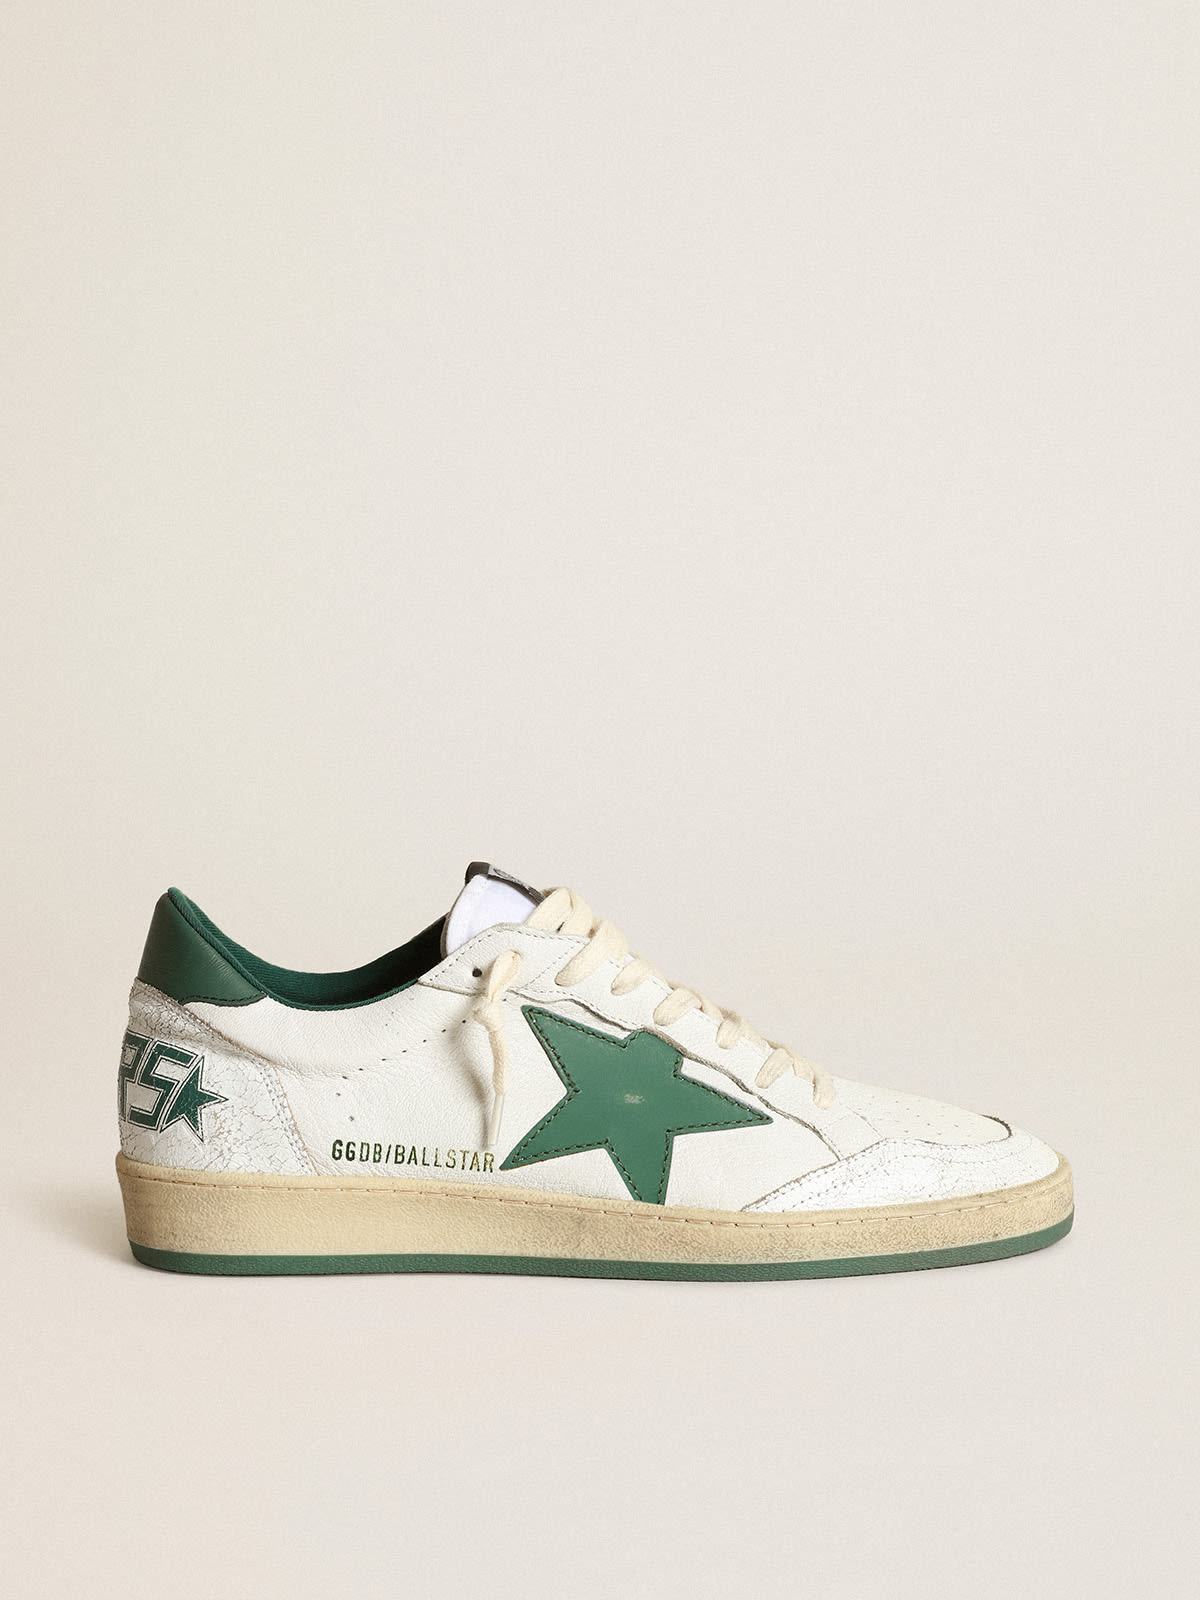 Men's Ball Star in white nappa leather with green leather star and heel tab